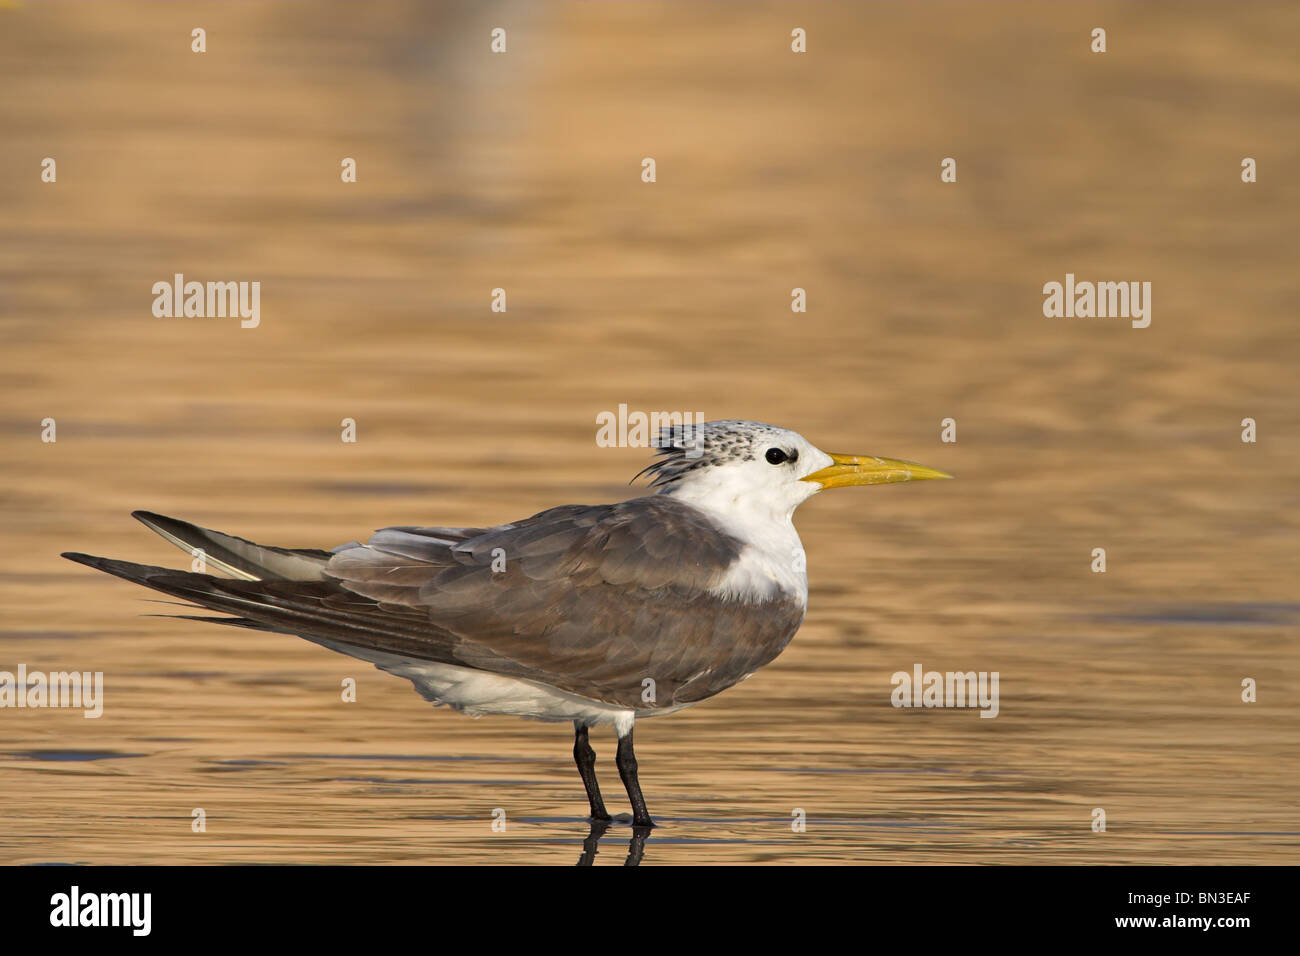 Greater Crested Tern (Sterna bergii) standing in shallow water, side view Stock Photo